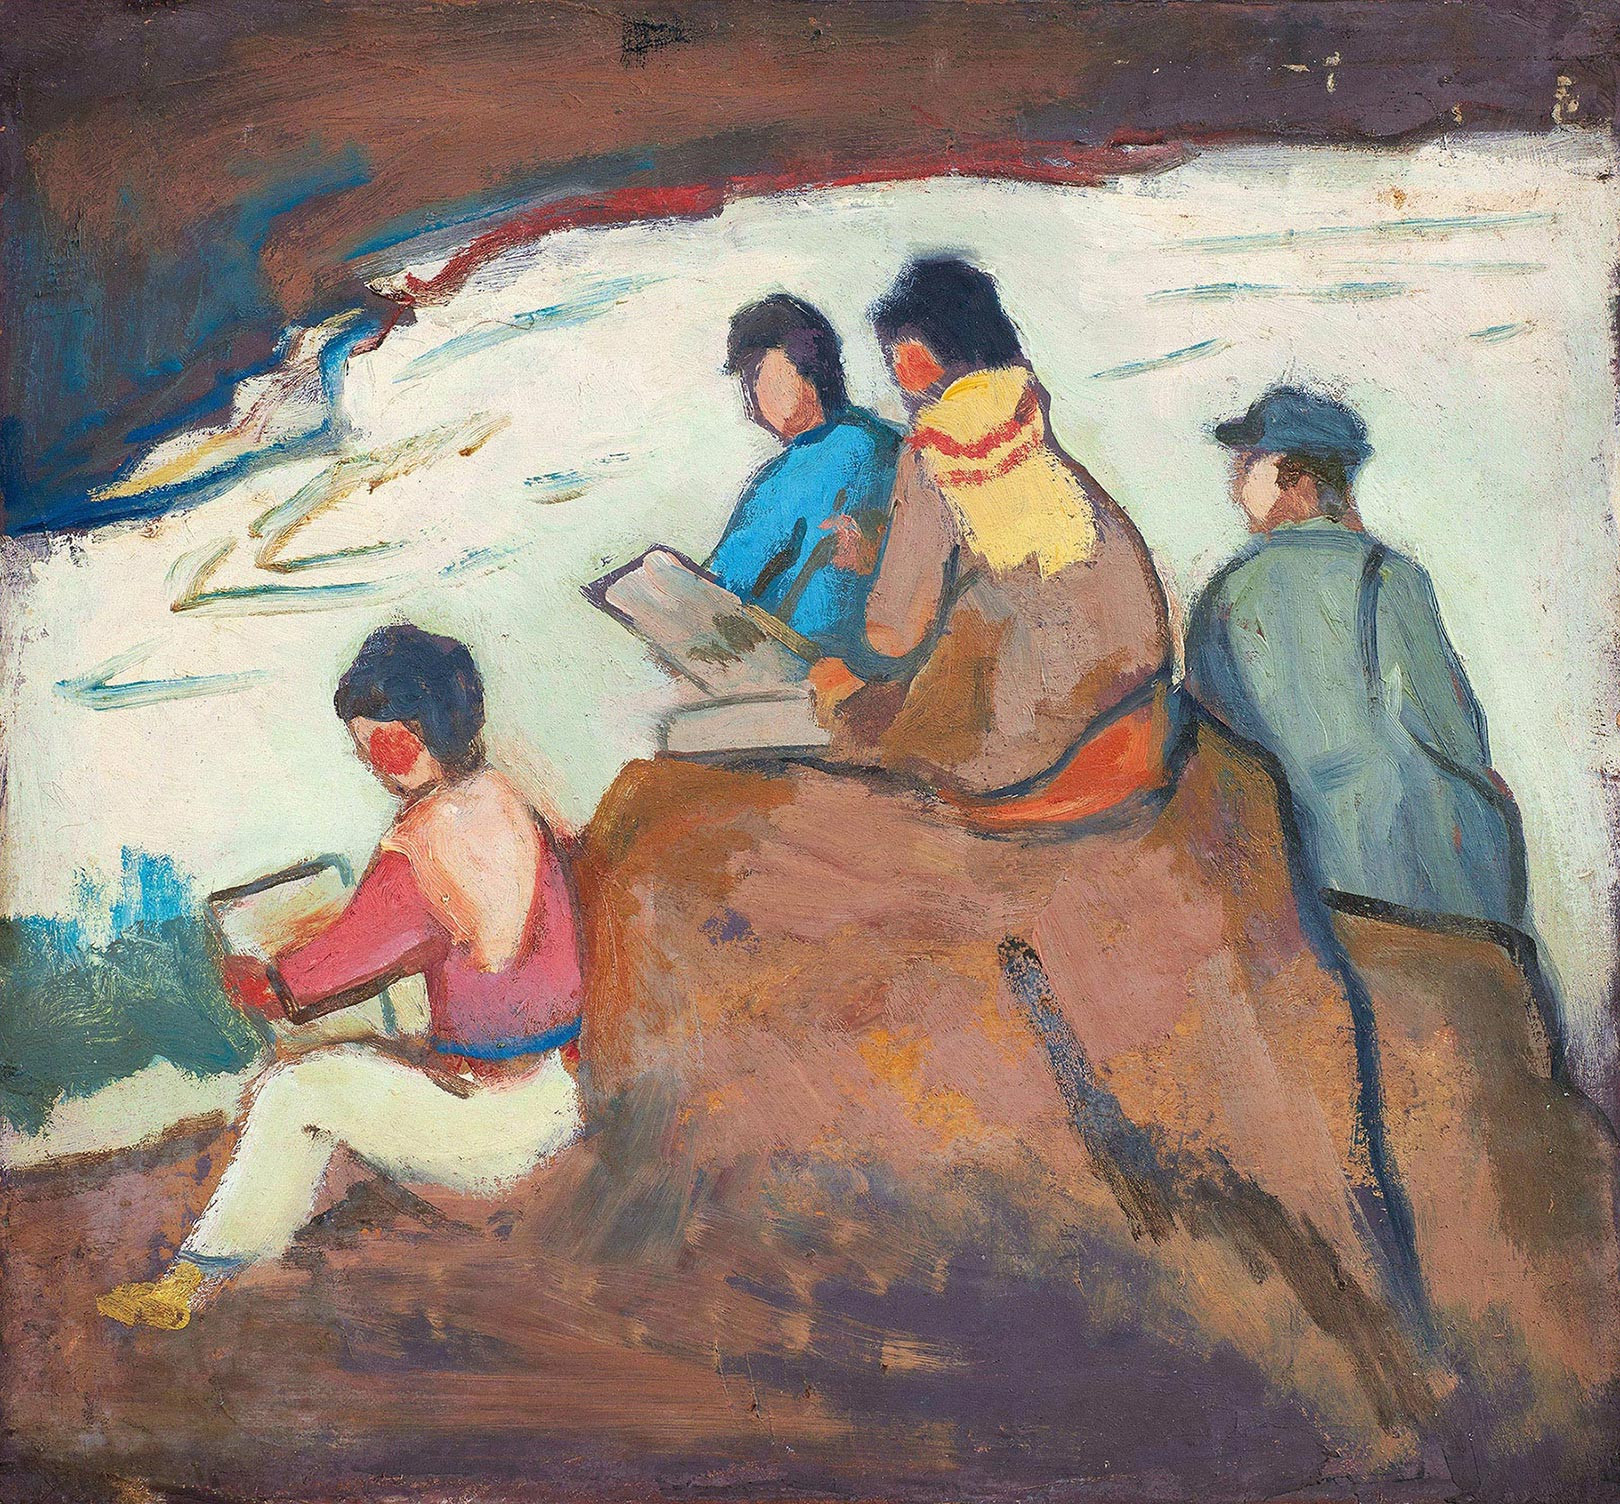 TEACHER AND STUDENTS SKETCHING